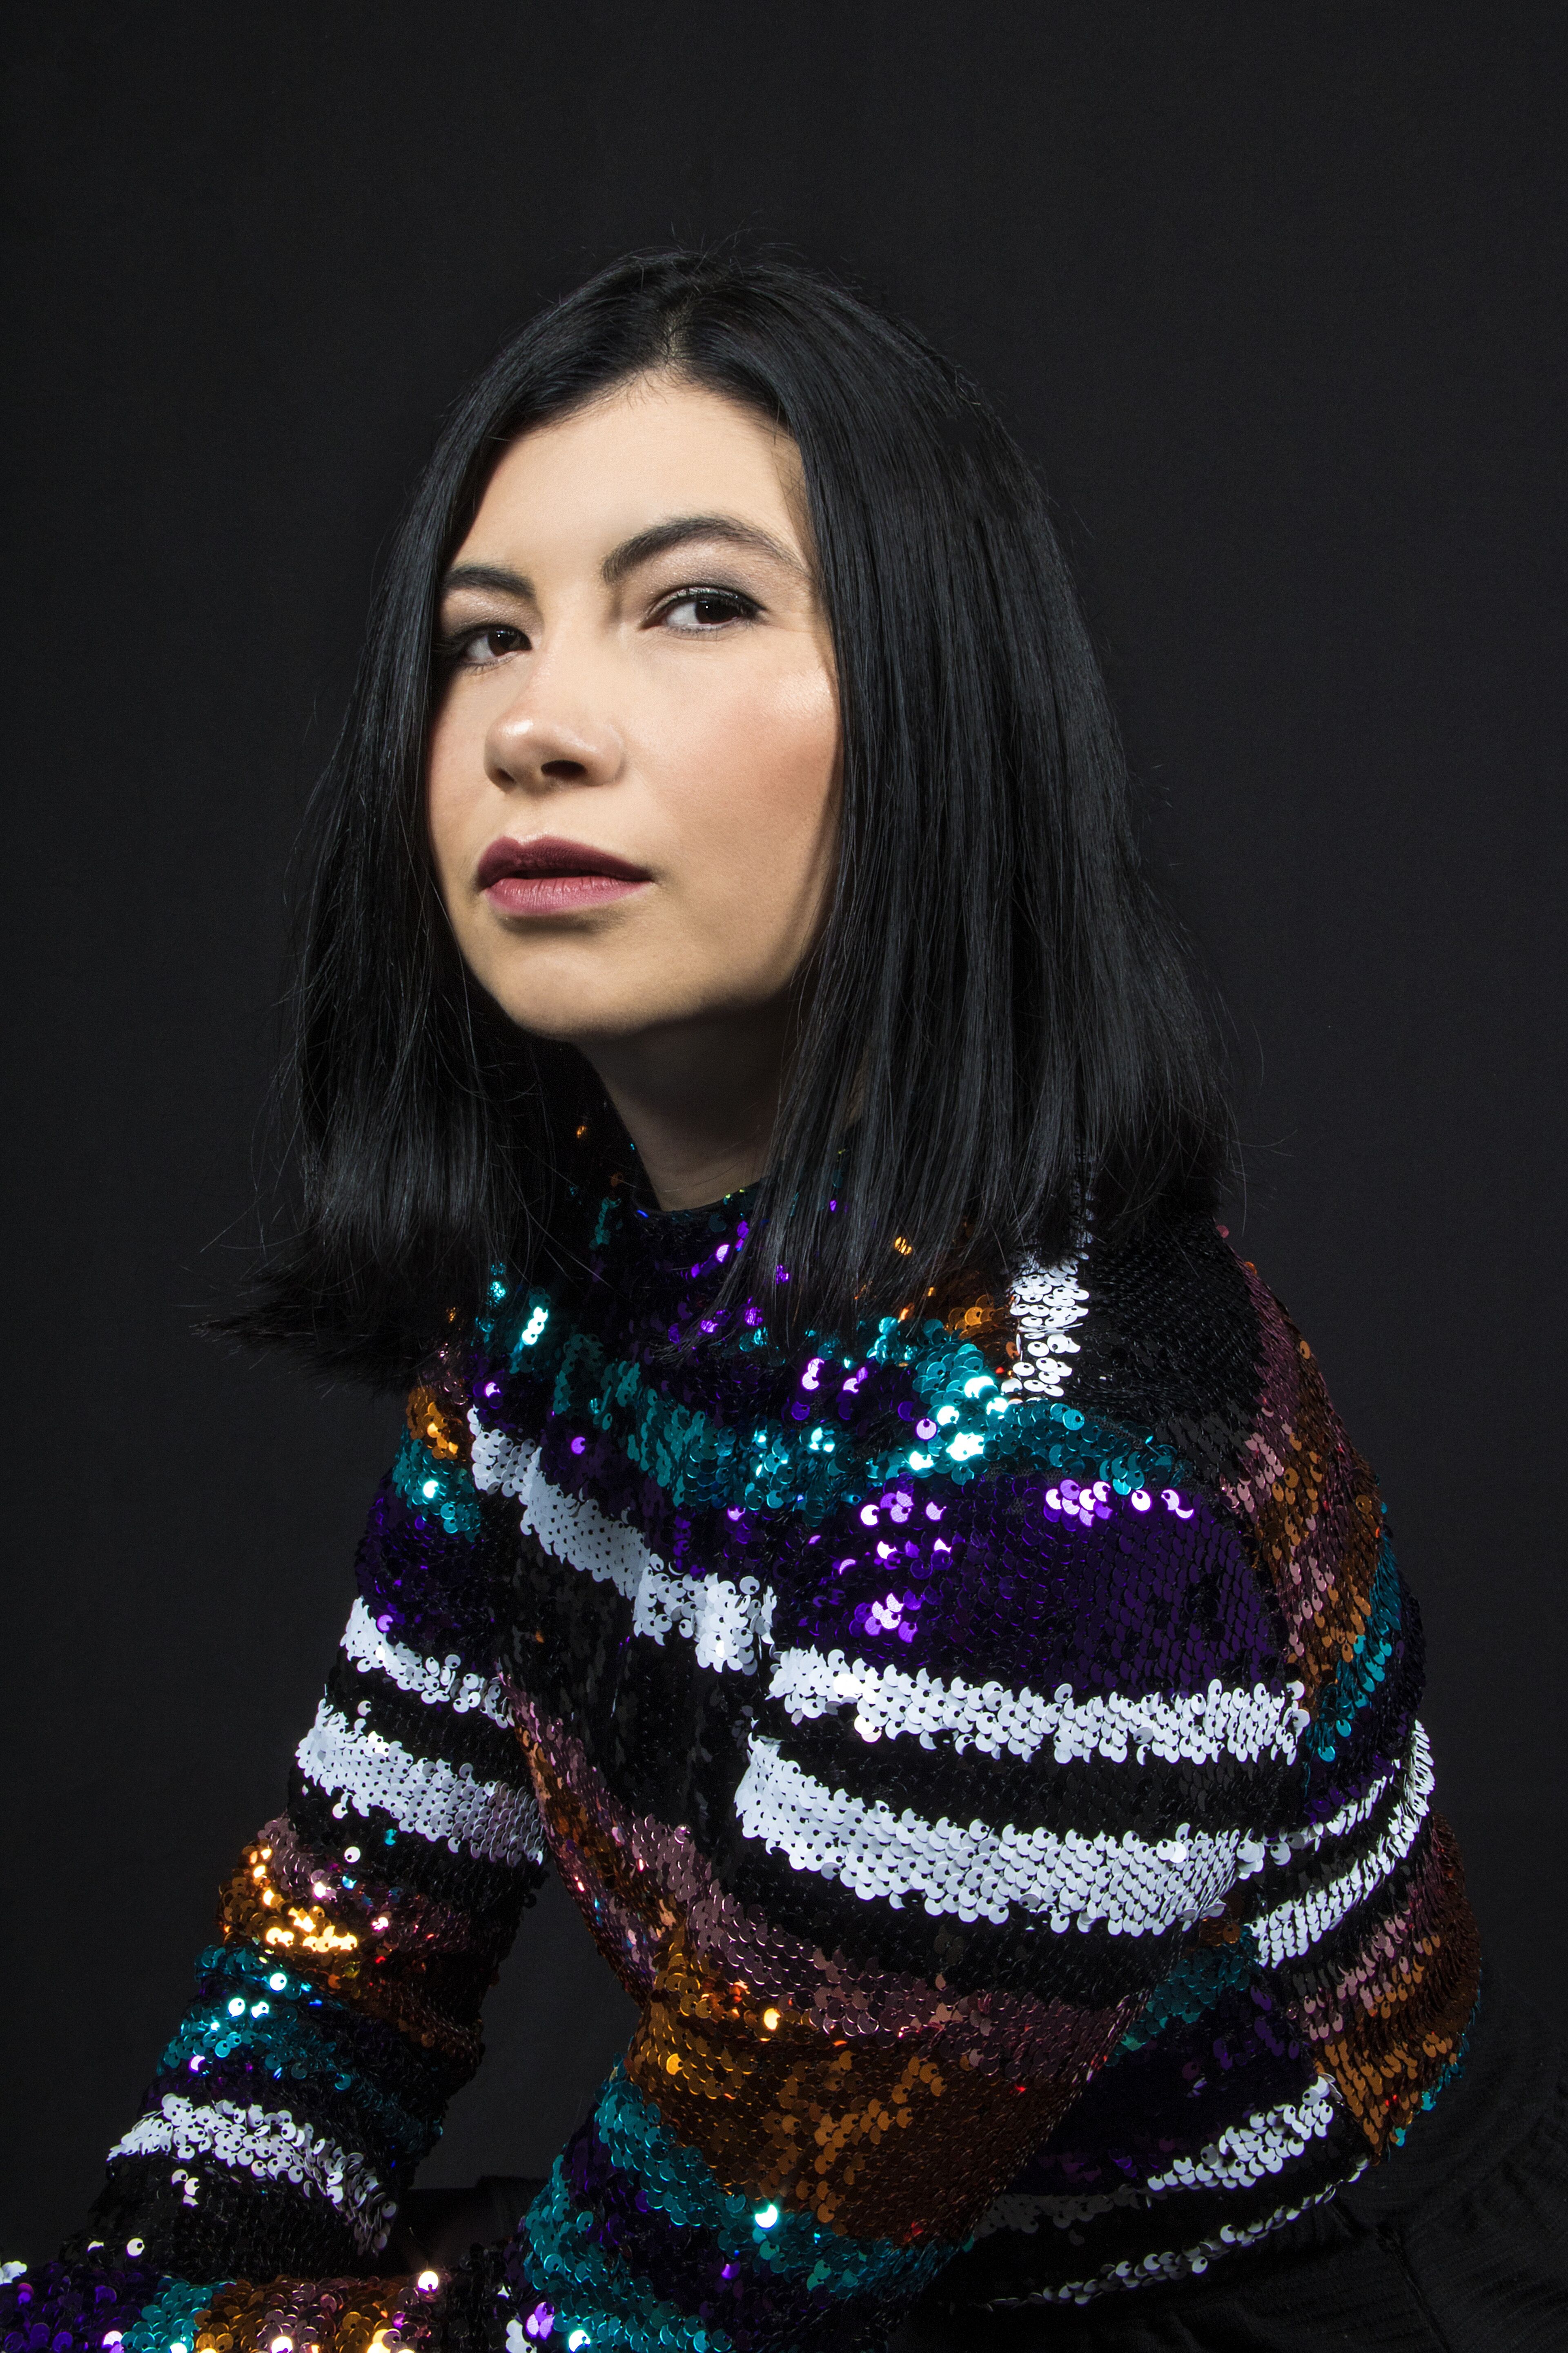 A poised woman with black hair against a black background, wearing a multicolored sequined top.